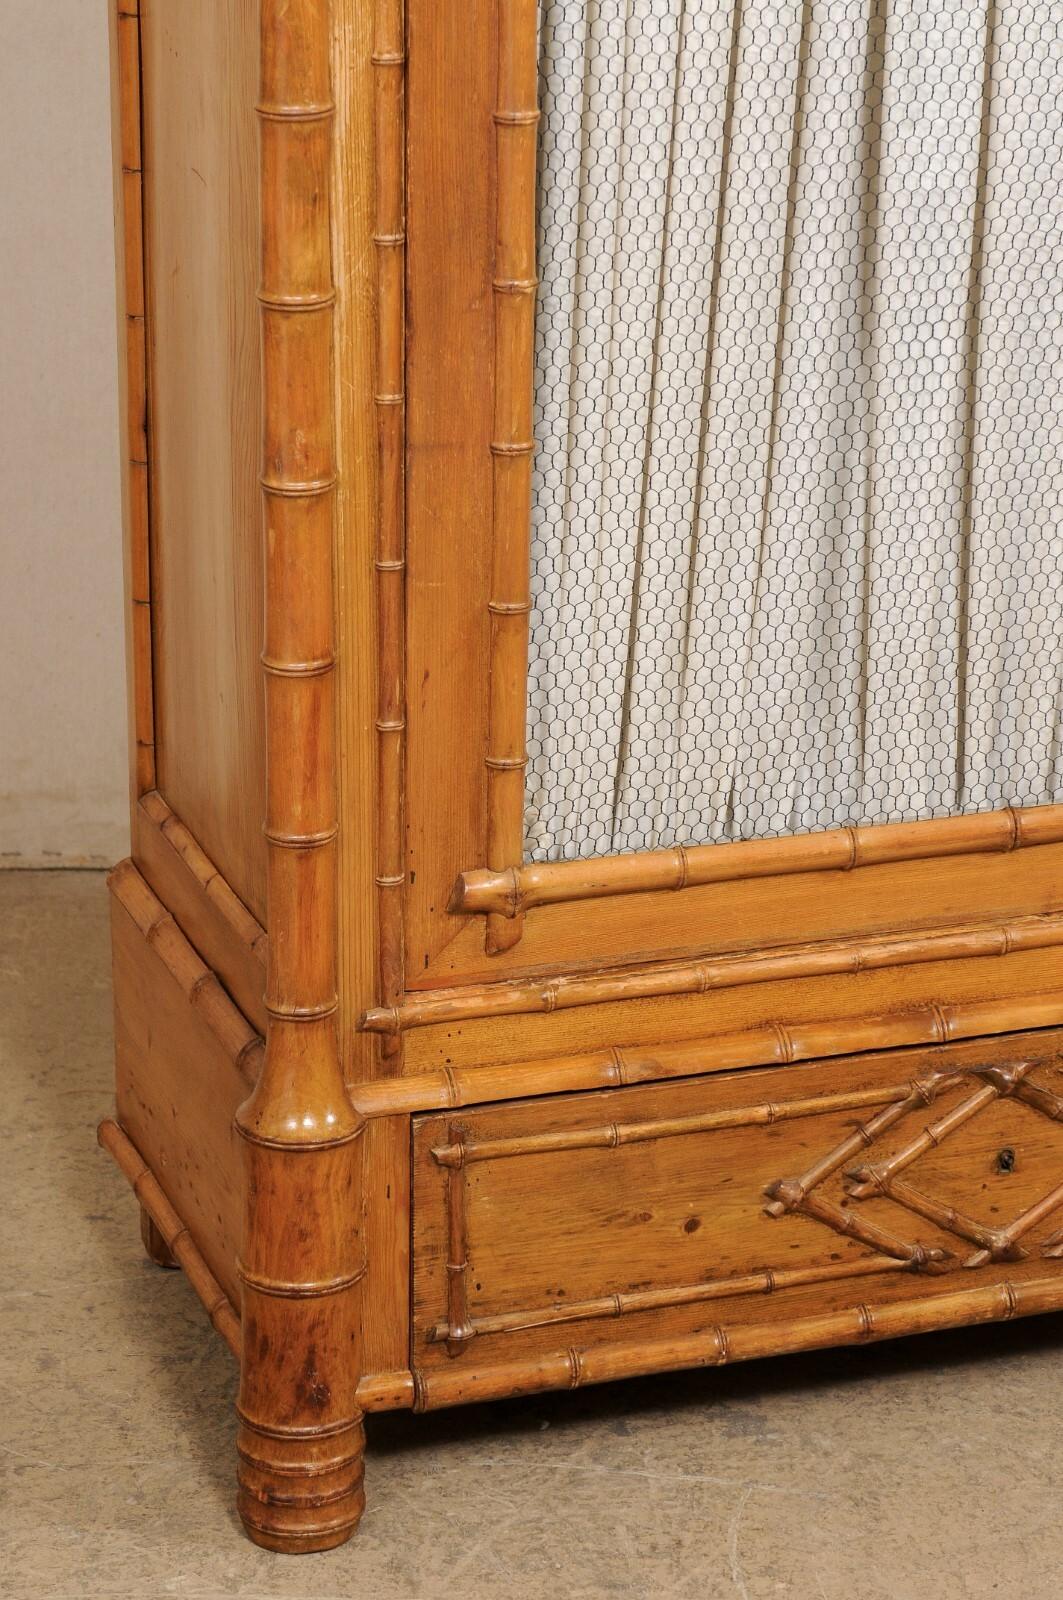 A tall English cabinet with faux bamboo design and glass panel front door, from the early 20th century. This antique curio cabinet from England features a beautiful raised pediment top with finials adorning the front side posts. It has been